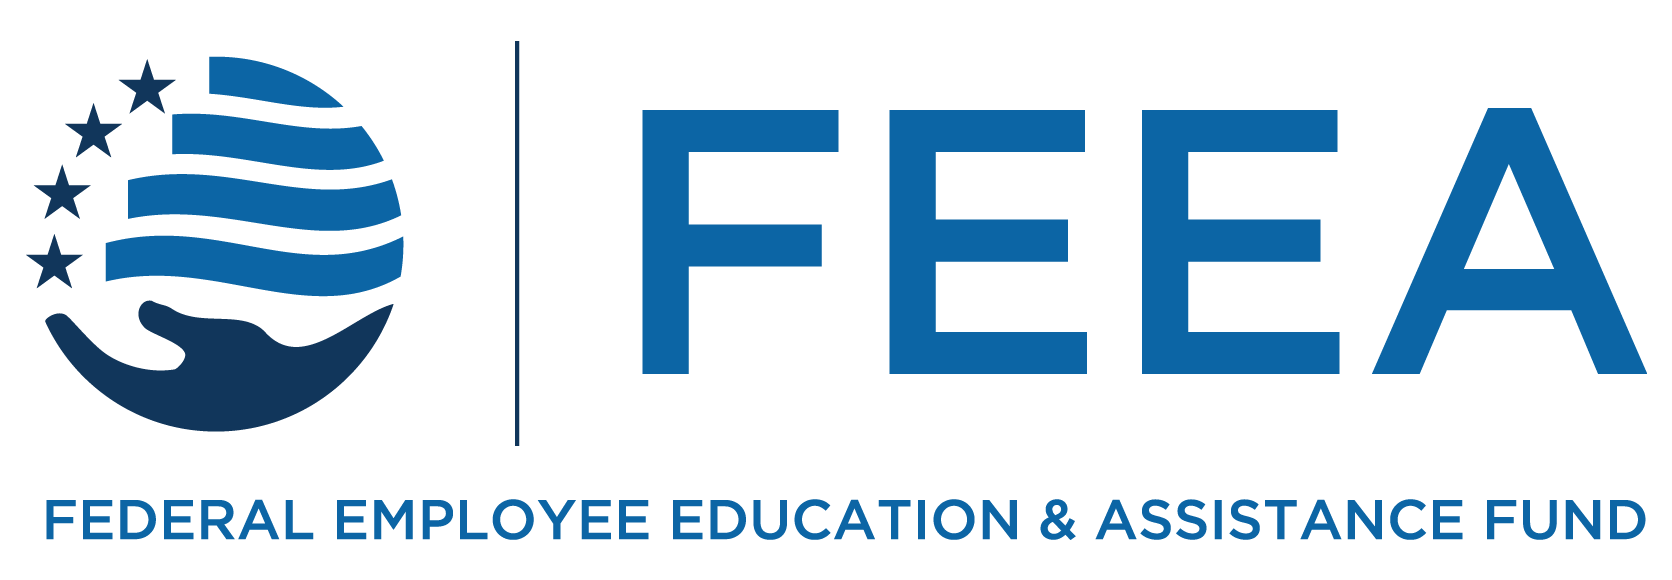 Federal Employee Education & Assistance Fund